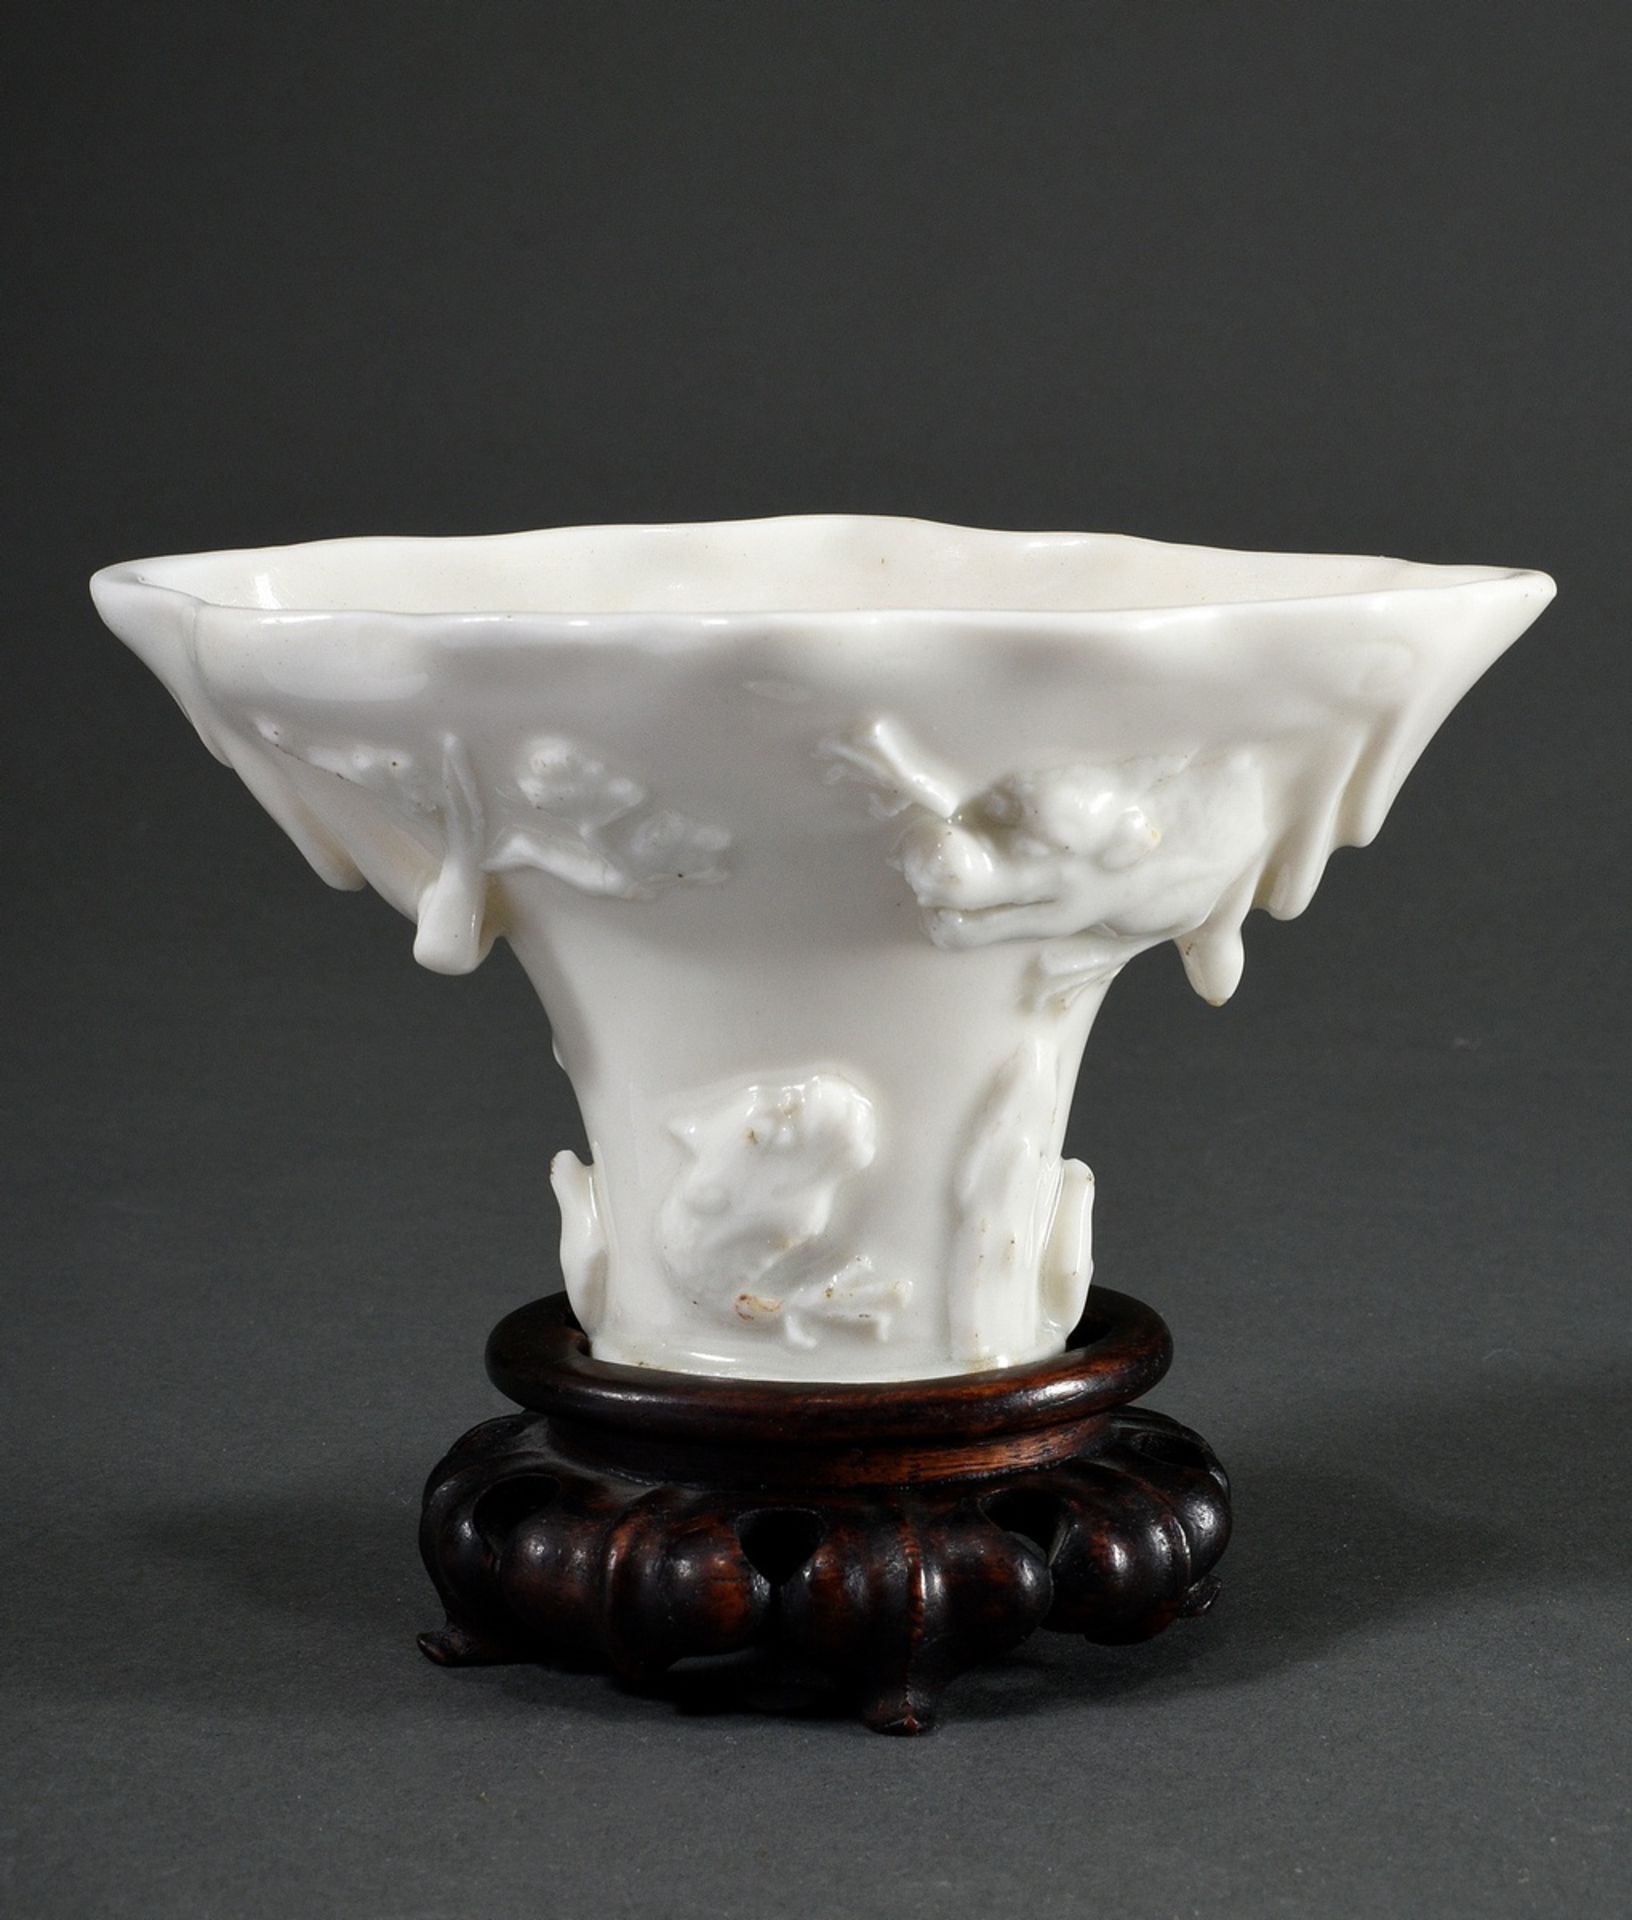 Blanc de Chine drinking cup with decoration in relief "dragon, deer and twigs" in the form of a rhi